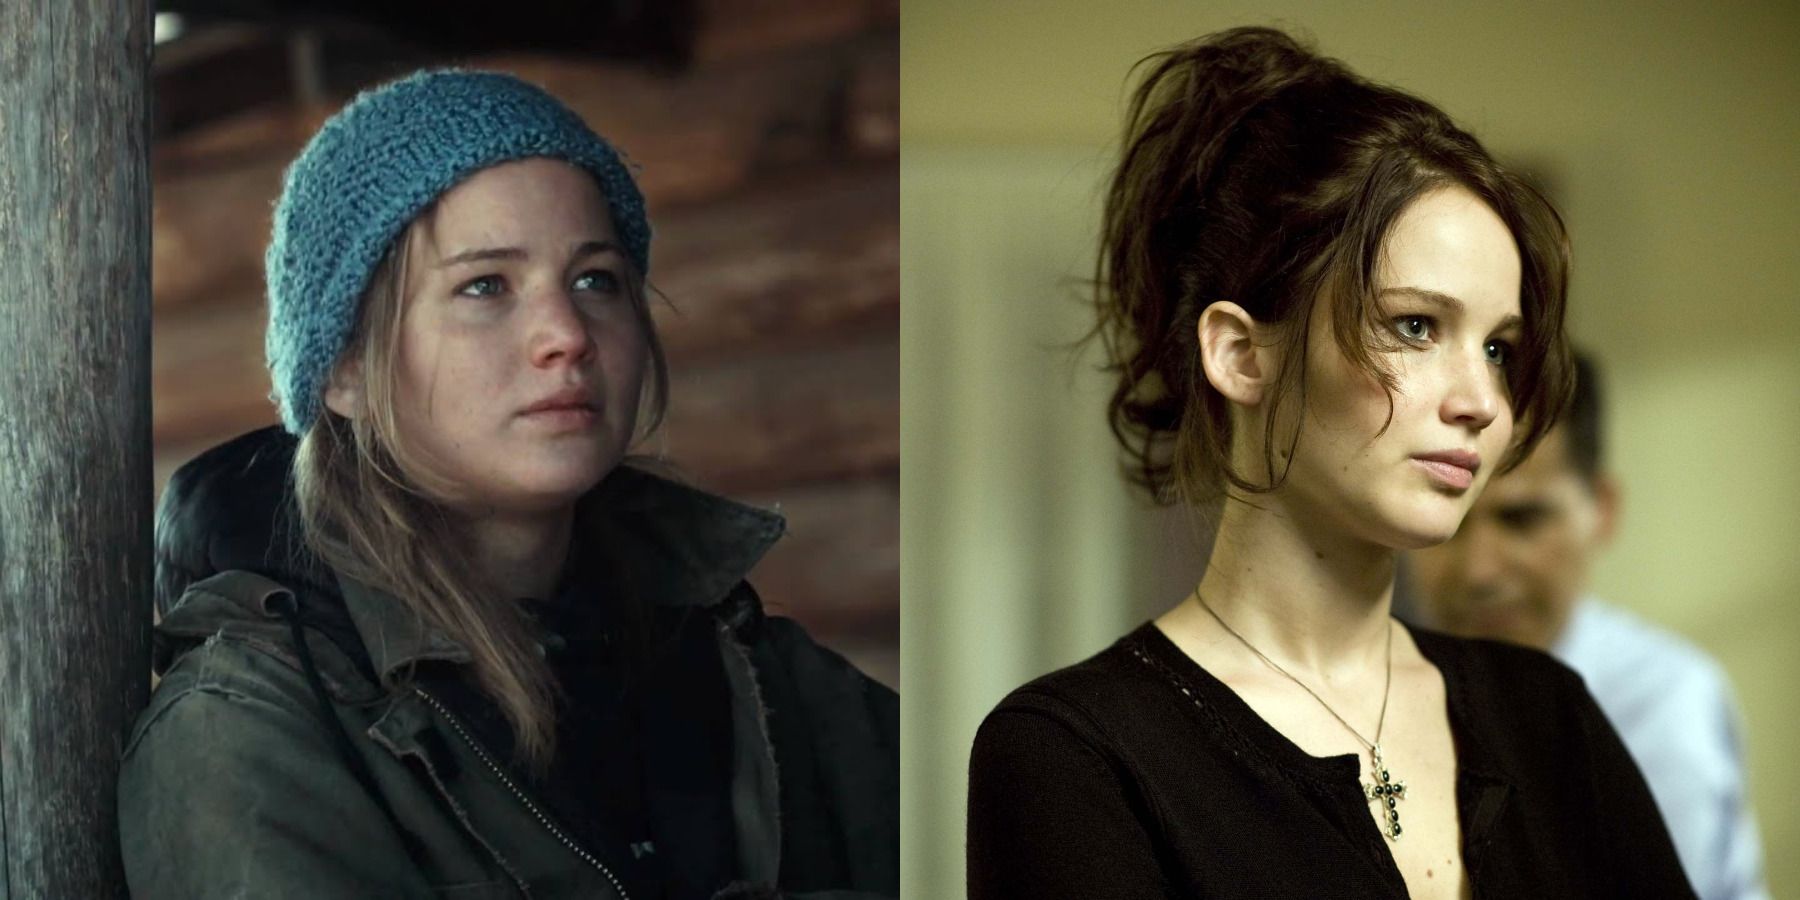 Jennifer Lawrence best movies feature split image Winter's Bone and Silver Linings Playbook